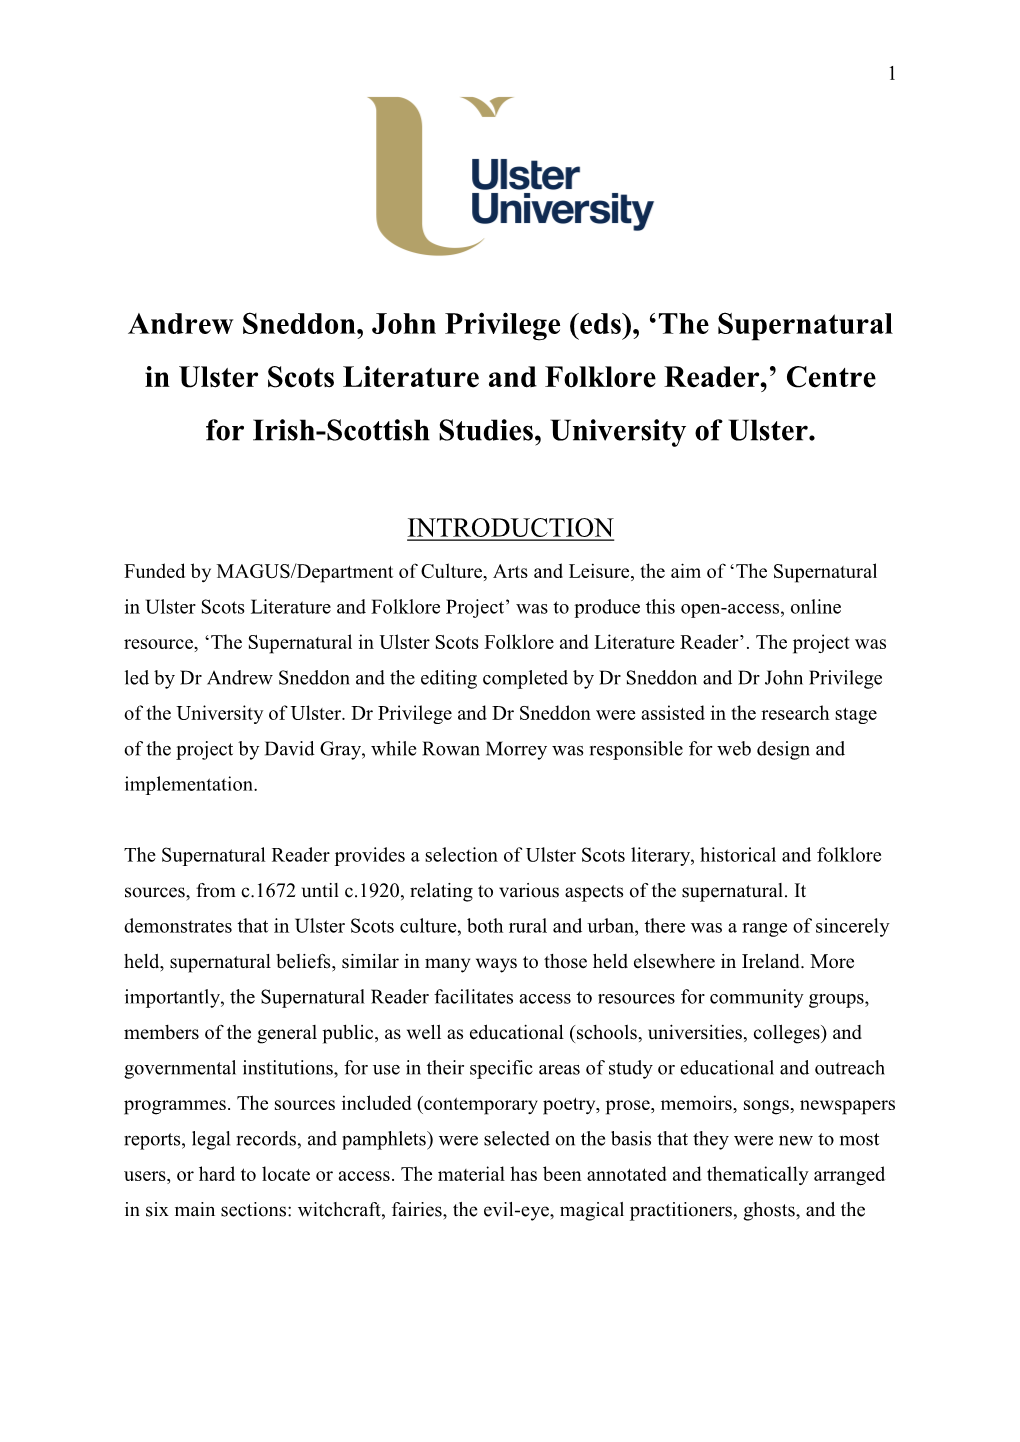 Andrew Sneddon, John Privilege (Eds), 'The Supernatural in Ulster Scots Literature and Folklore Reader,' Centre for Irish-Sc